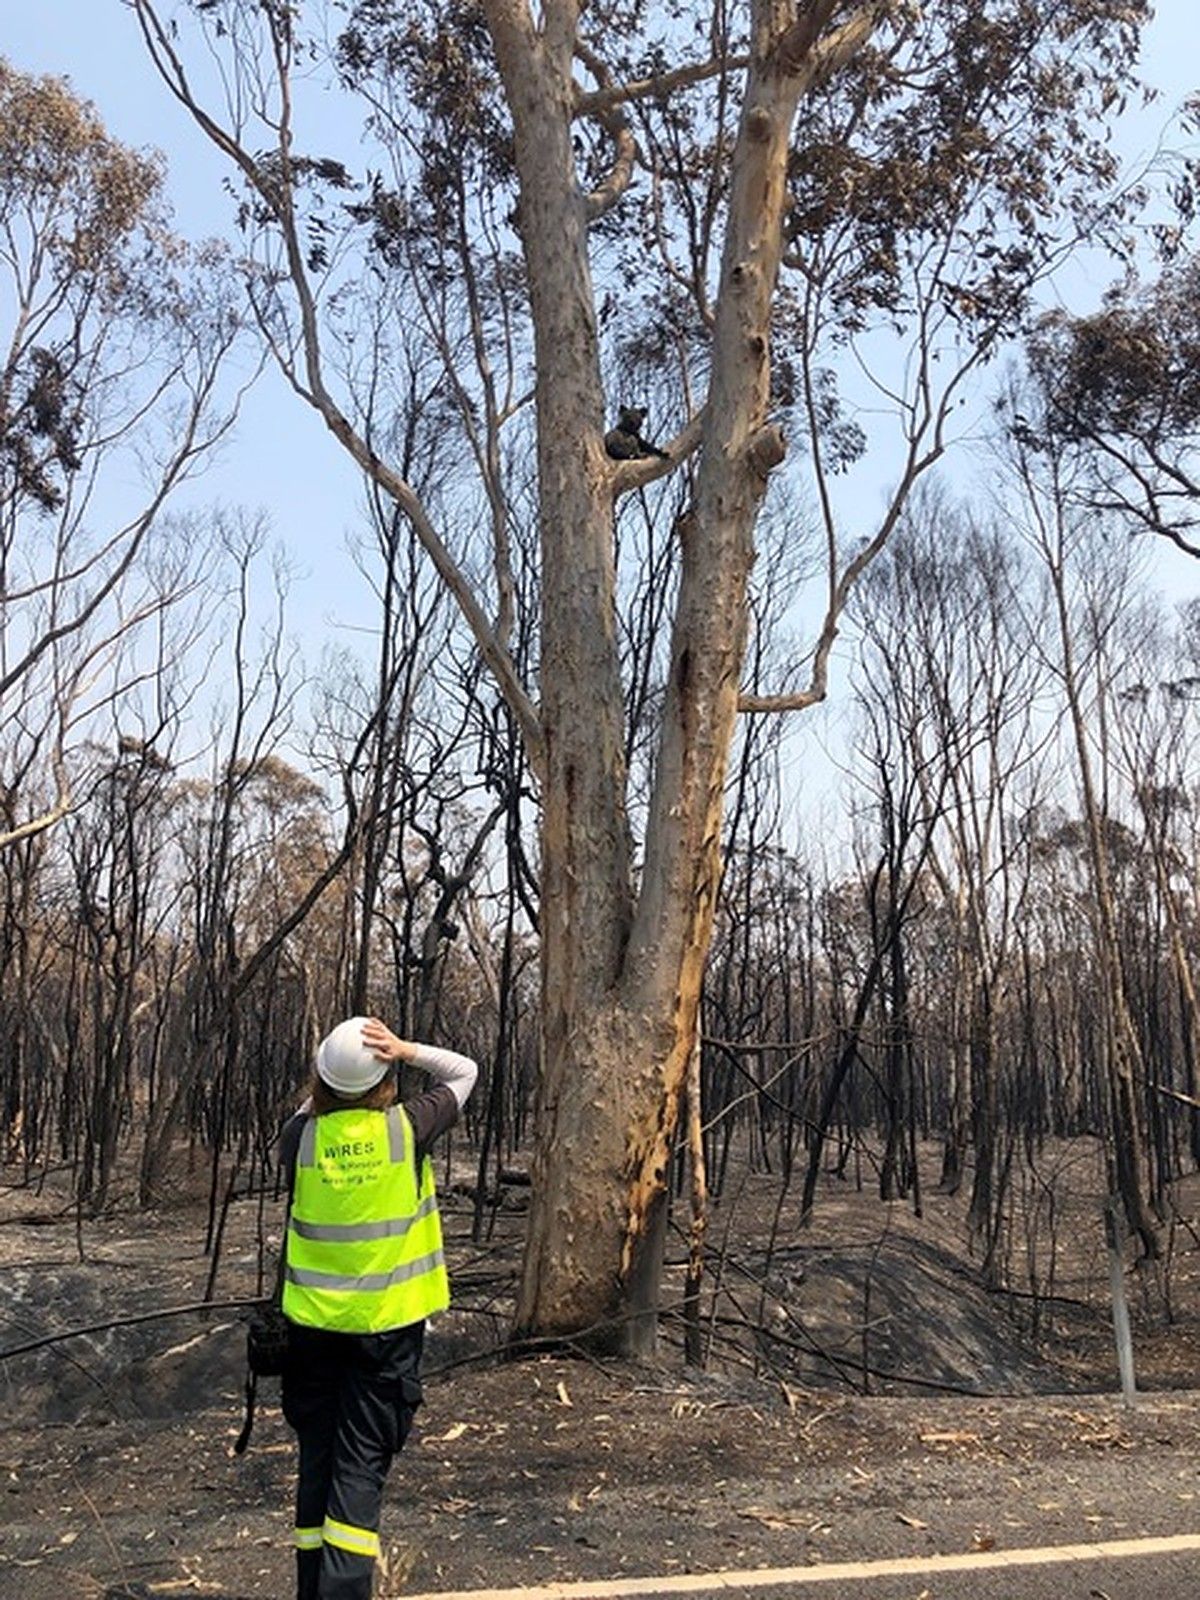  A dehydrated and hungry koala found in a burnt out area after the Hawkesbury bushfires 